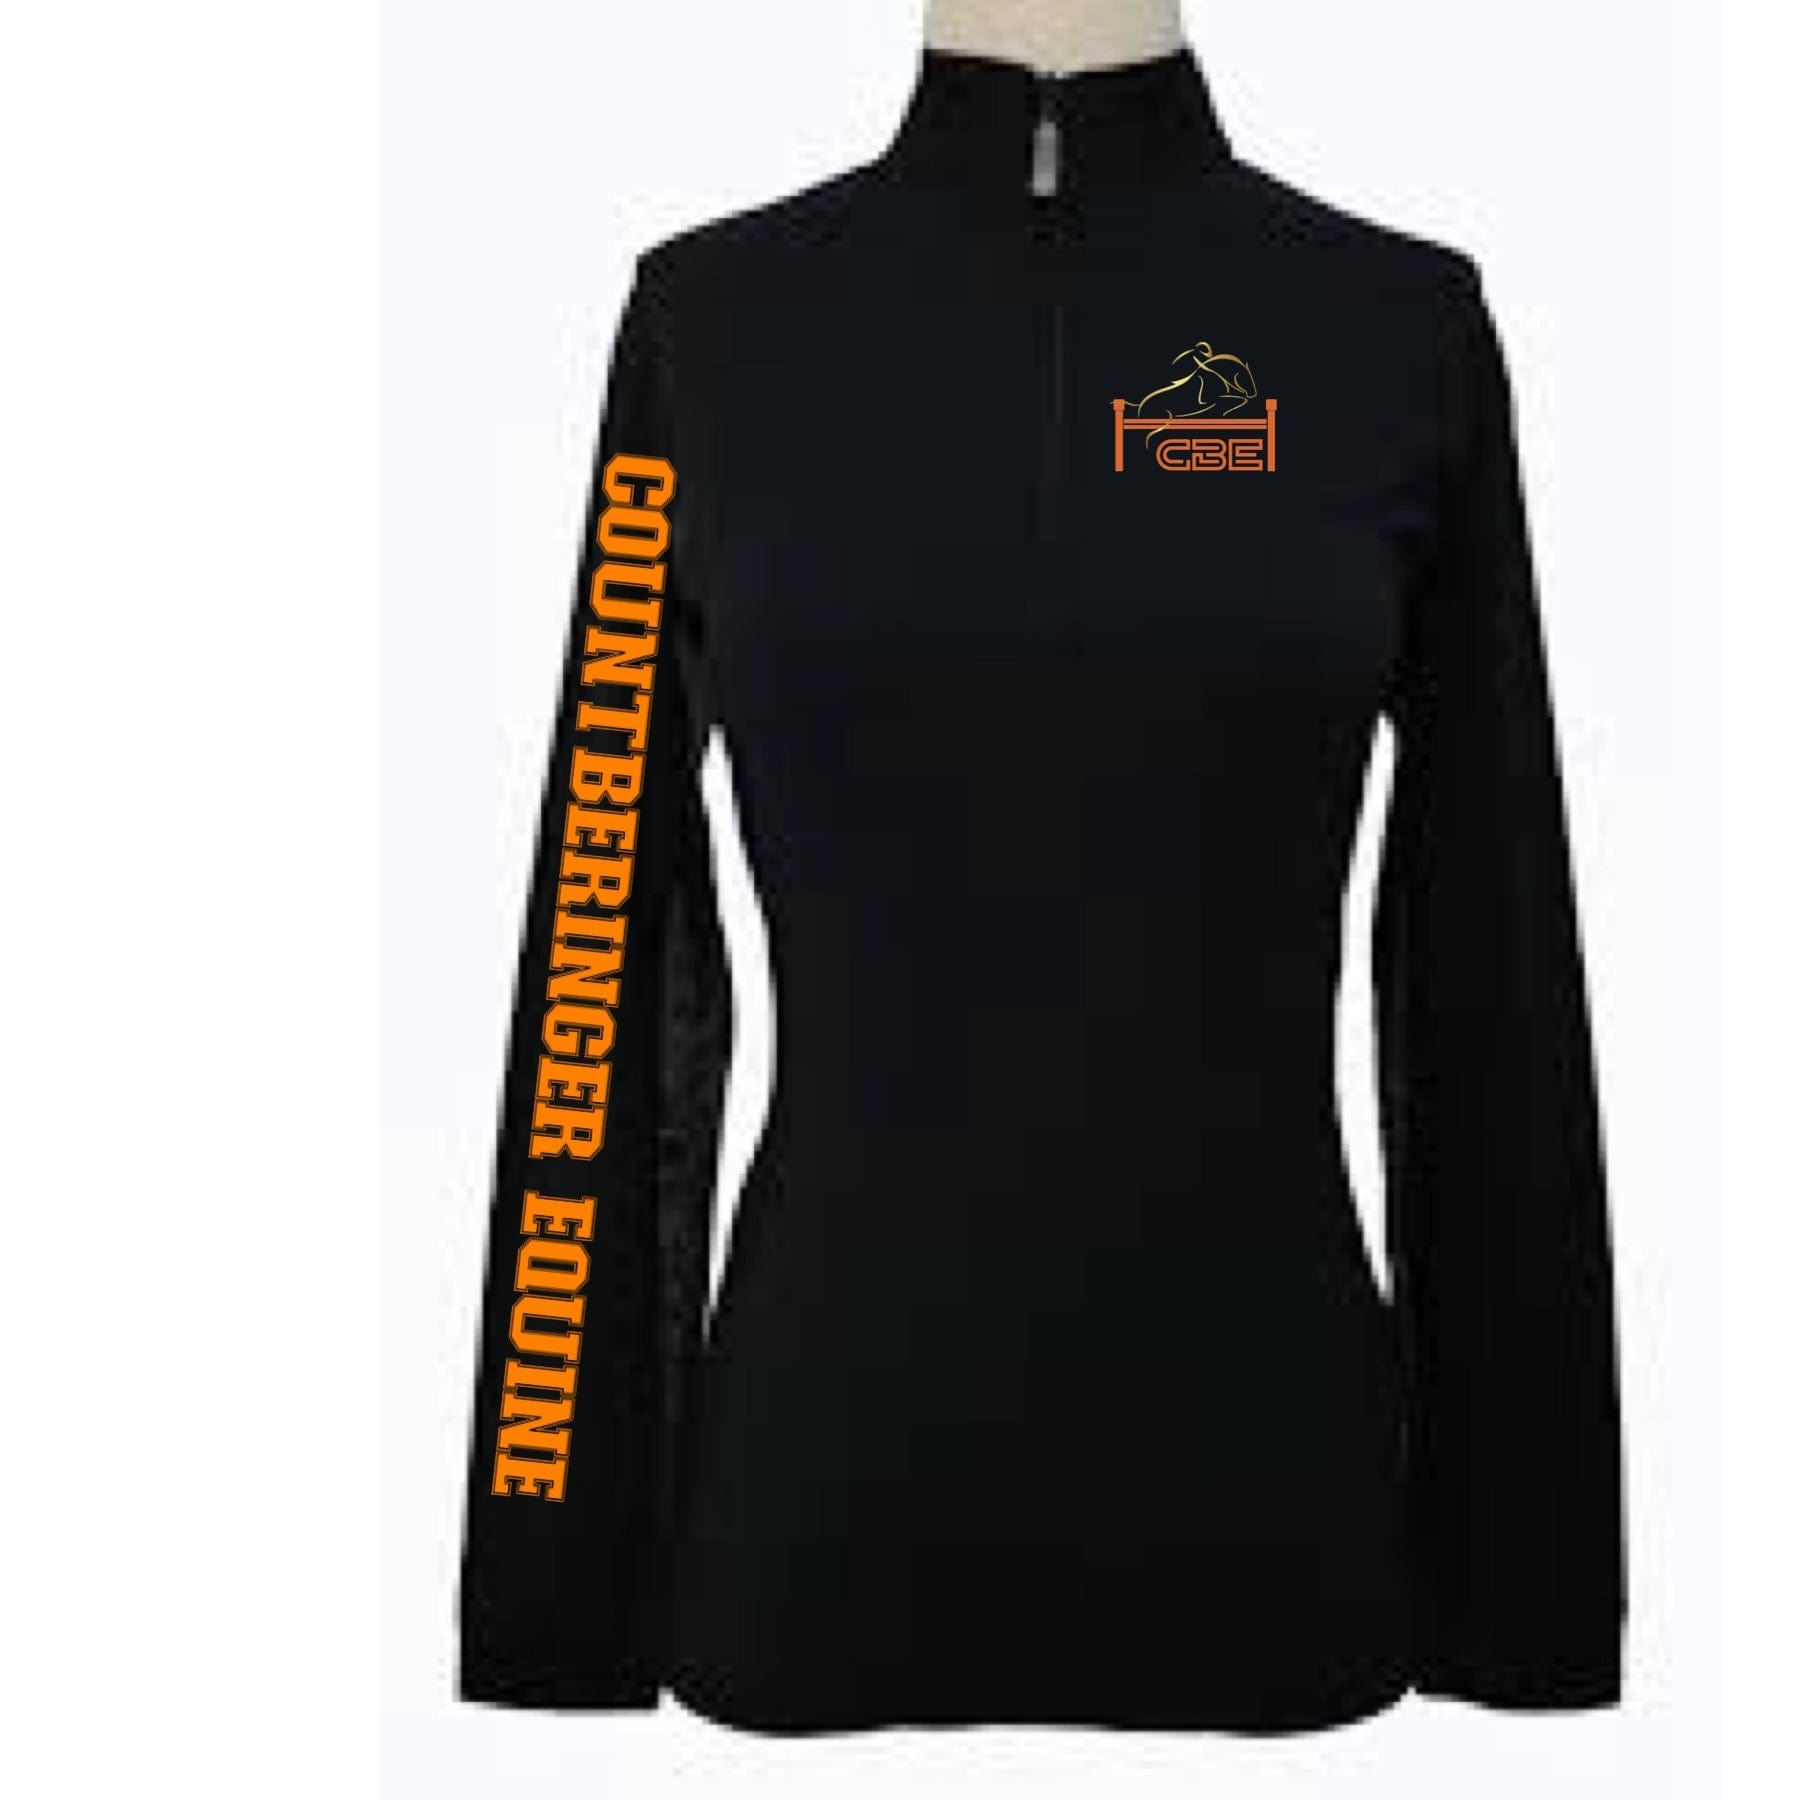 Equestrian Team Apparel Countberinger Equine Black Sun Shirt equestrian team apparel online tack store mobile tack store custom farm apparel custom show stable clothing equestrian lifestyle horse show clothing riding clothes horses equestrian tack store